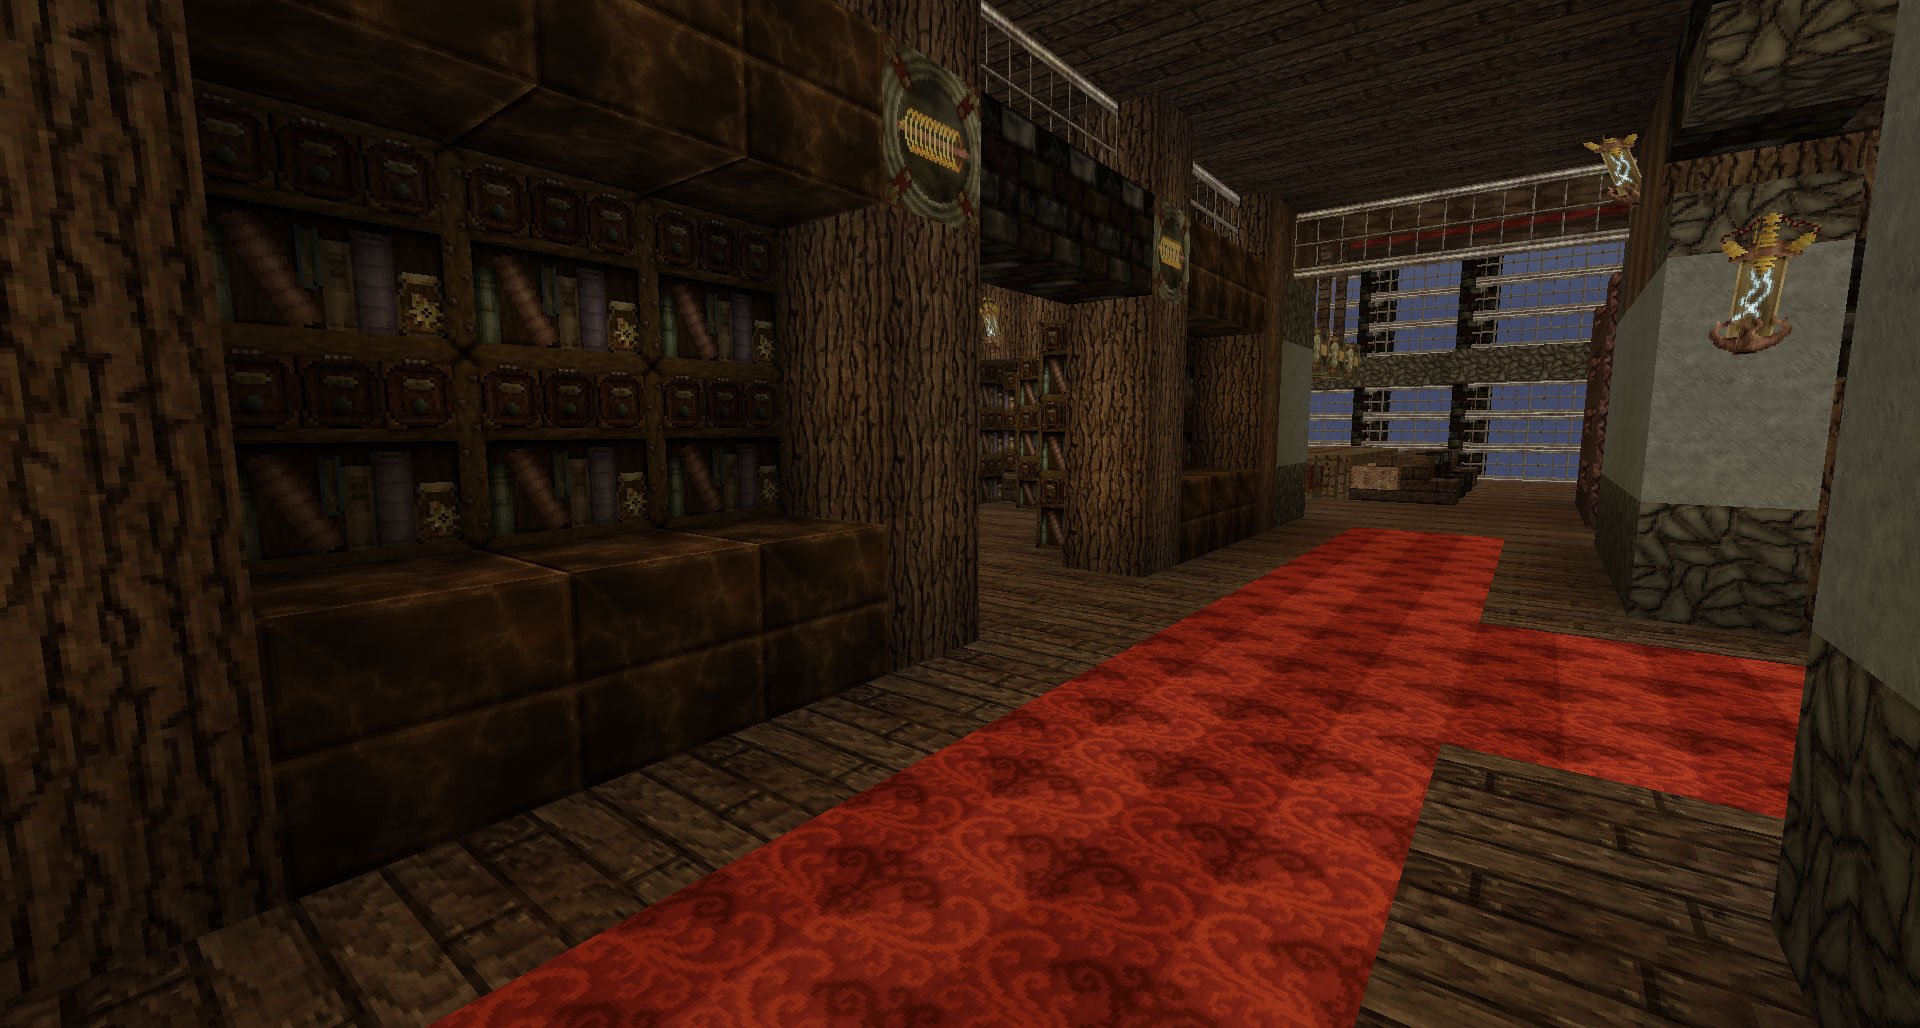 Minecraft Special Pack Texture Pack For Minecraft 1.7.4 / 1.7.2 / 1.6.4